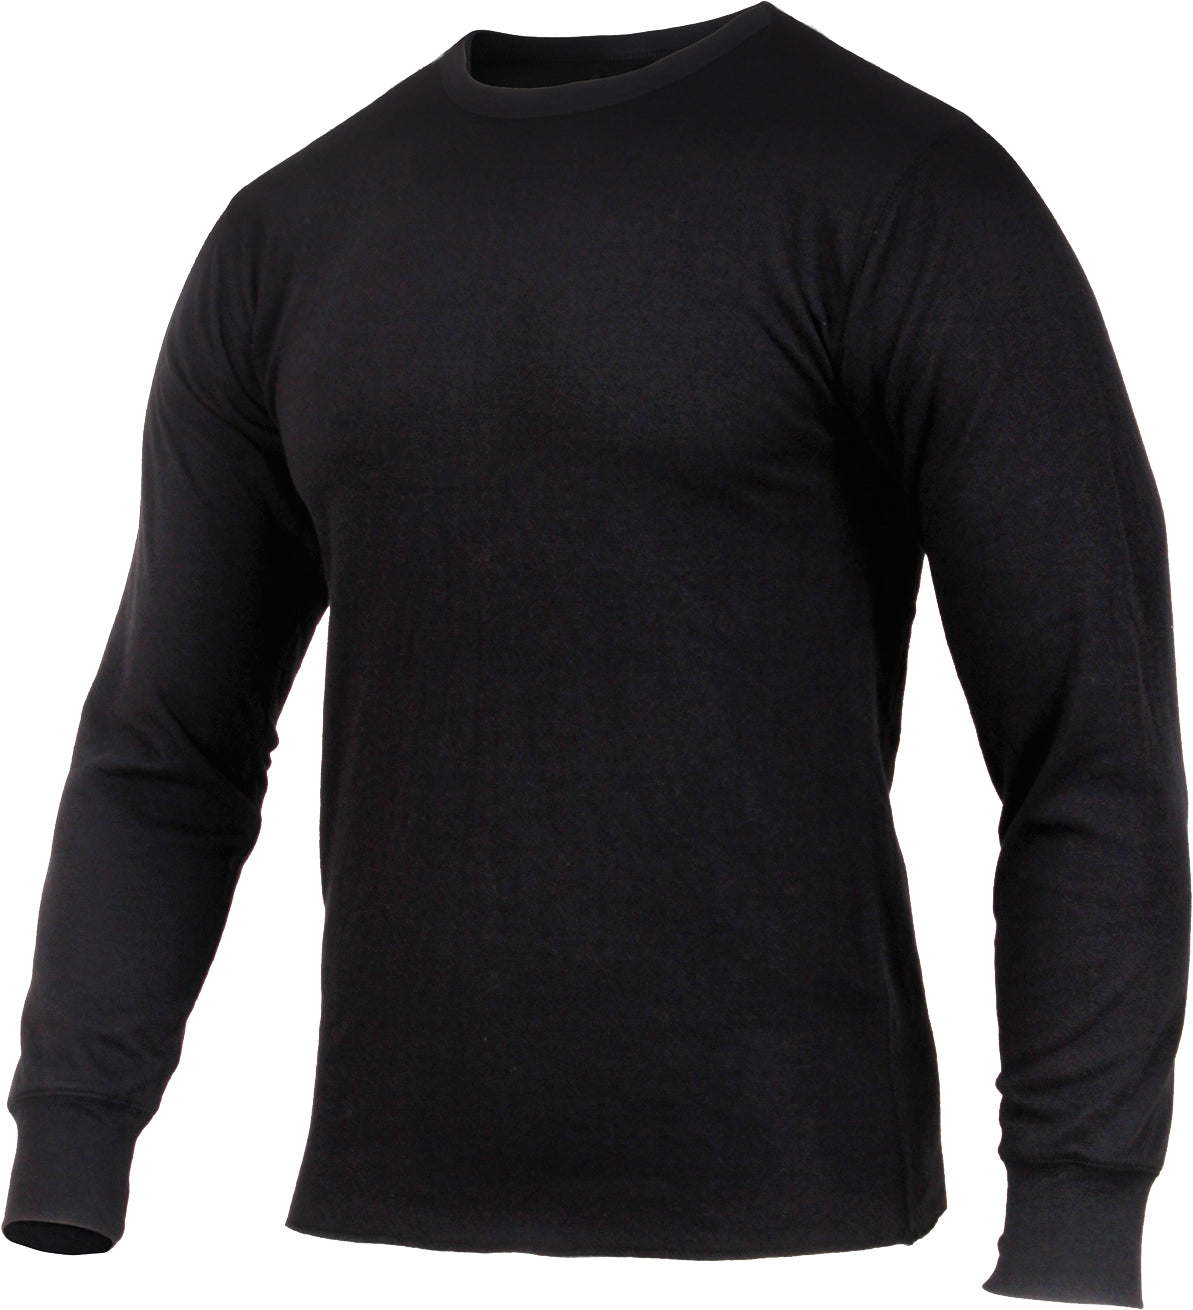 Black - Midweight Thermal Knit Top